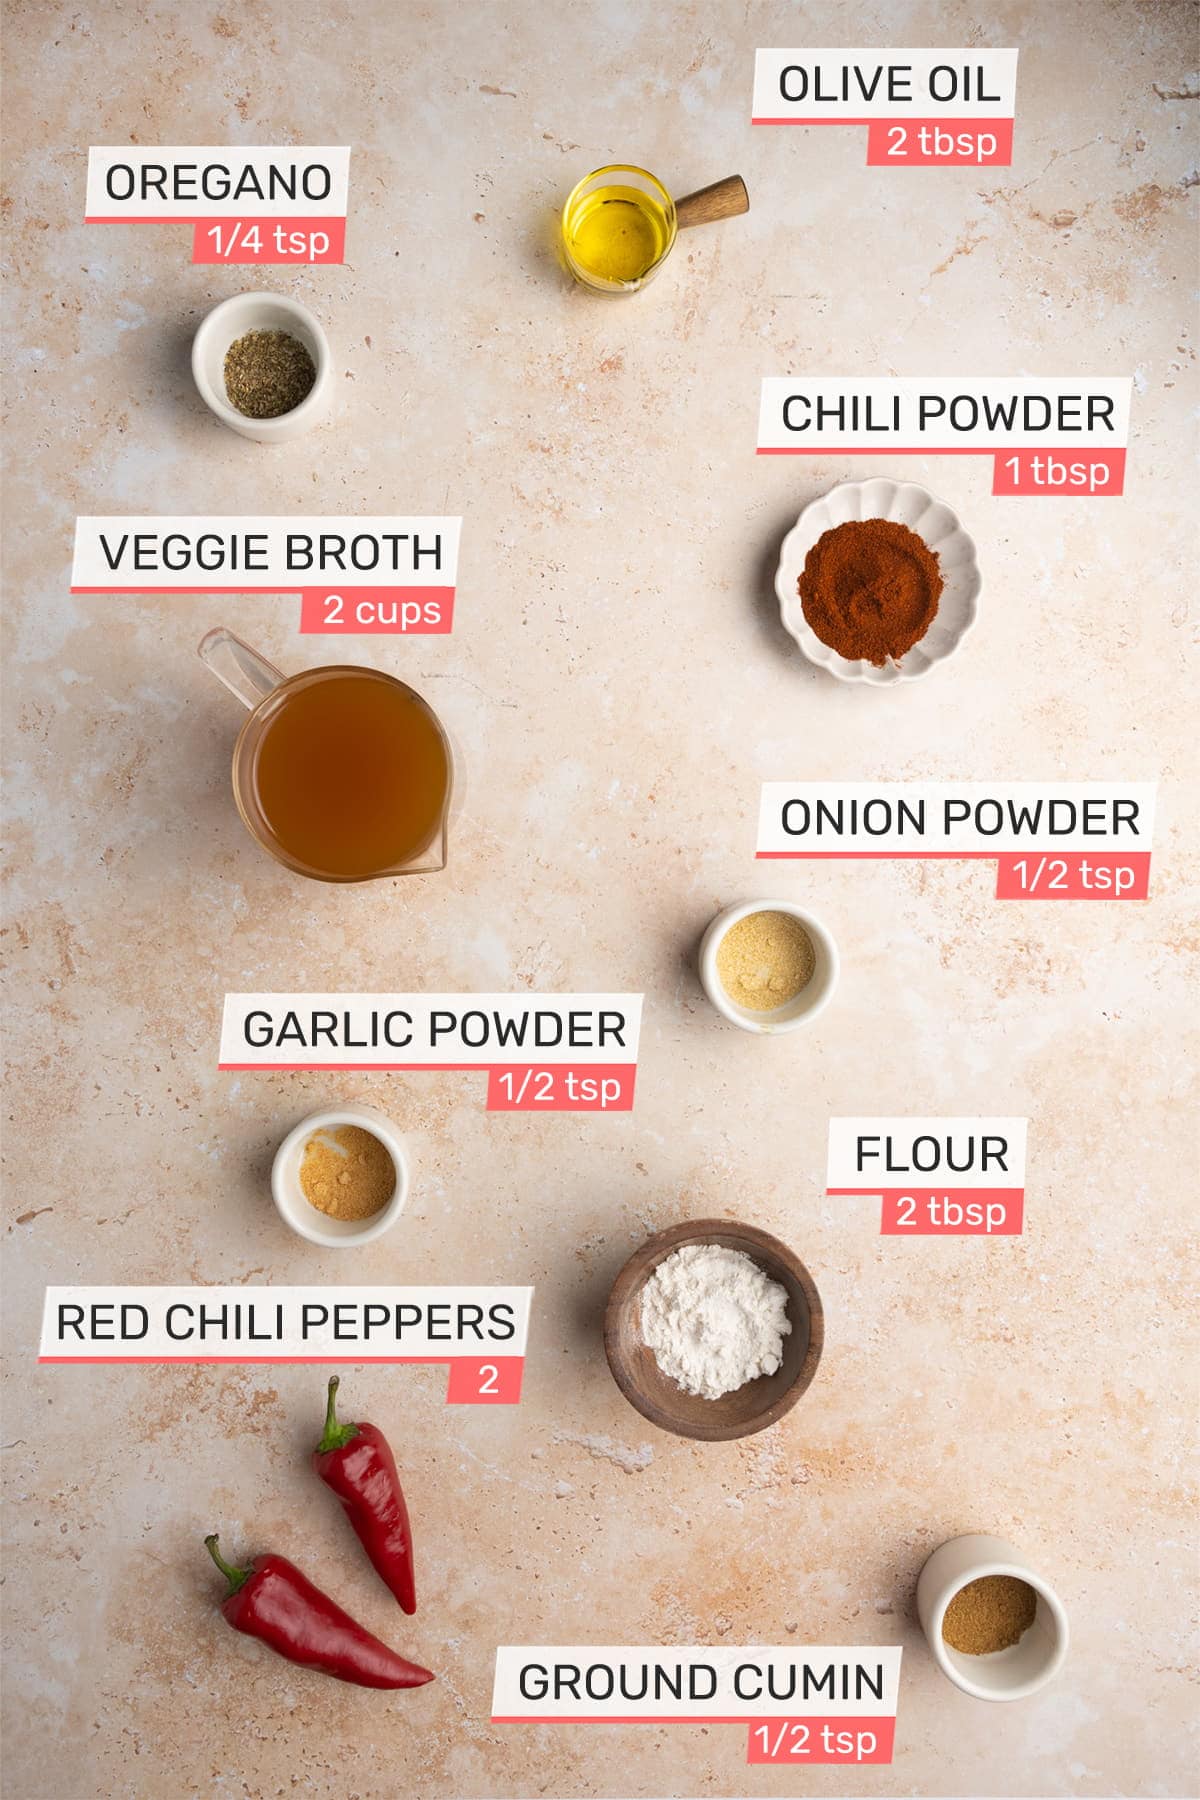 Overhead picture of all ingredients needed for Meatless Enchilada Sauce - Oregano, Olive Oil, Veggie Broth, Chili Powder, Onion Powder, Garlic Powder, Flour, Red Chili Peppers, Ground Cumin